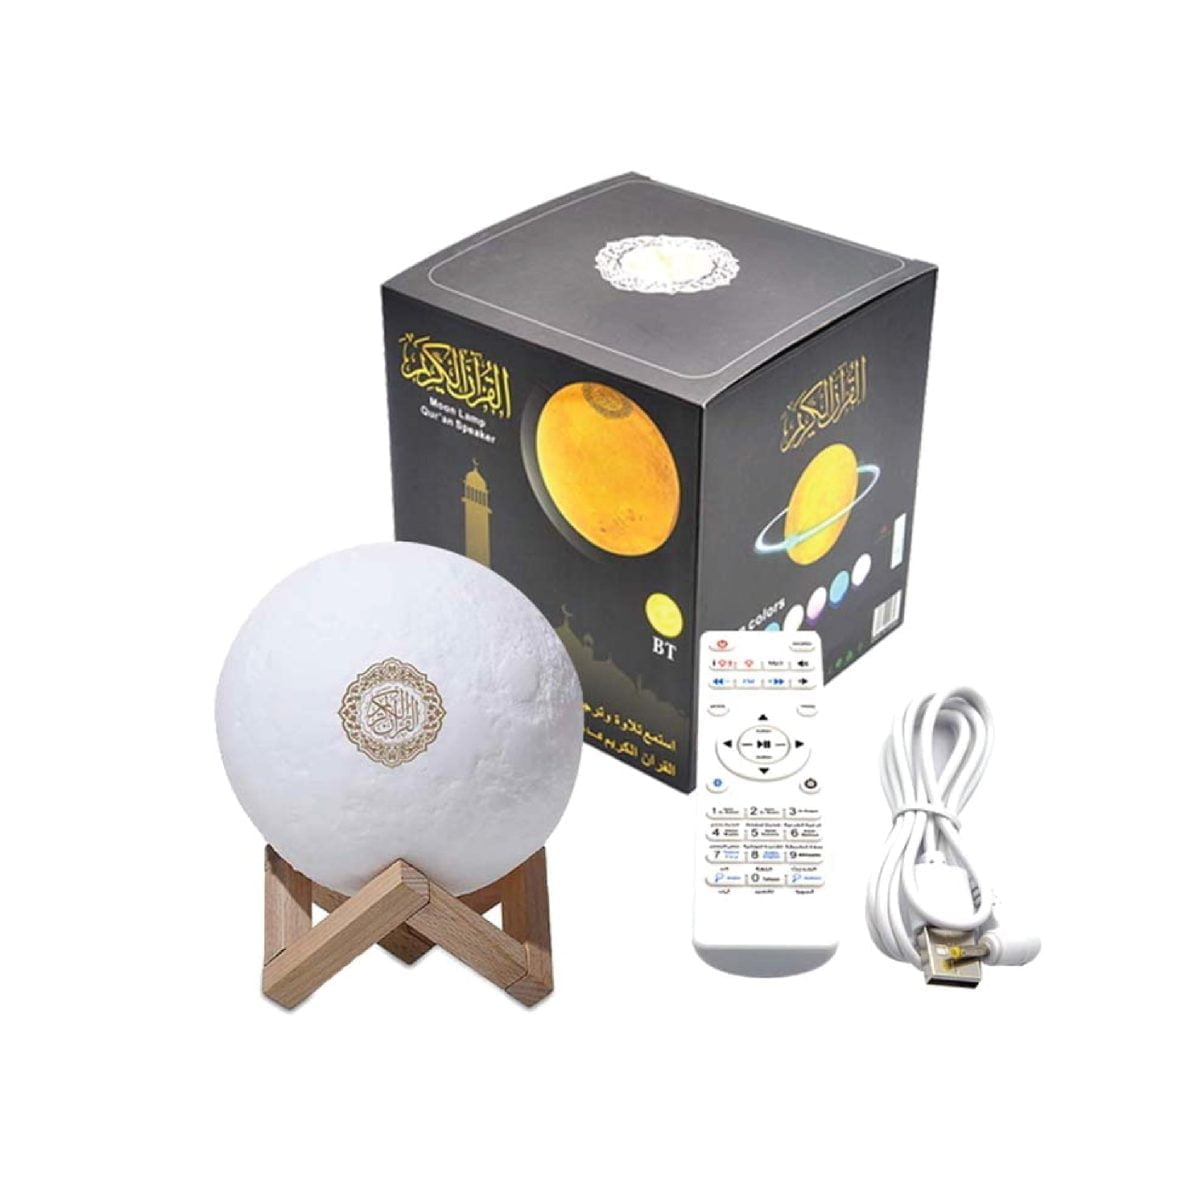 Weqweasd 24 Moon Lamp Qur'An Speaker - Moon Lamp With Quran Recitation - Sq-510With Rechargeable Remote Control, Full Recitations Of Famous Imams And Translation Of The Qur'An Into Many Languages, Including English, Arabic, French, Spanish, German, ... Contains 18 Recitations And 15 Languages Moon Lamp Qur'An Speaker Moon Lamp Qur'An Speaker Sq-510 (18 Reciter, 15 Translation)